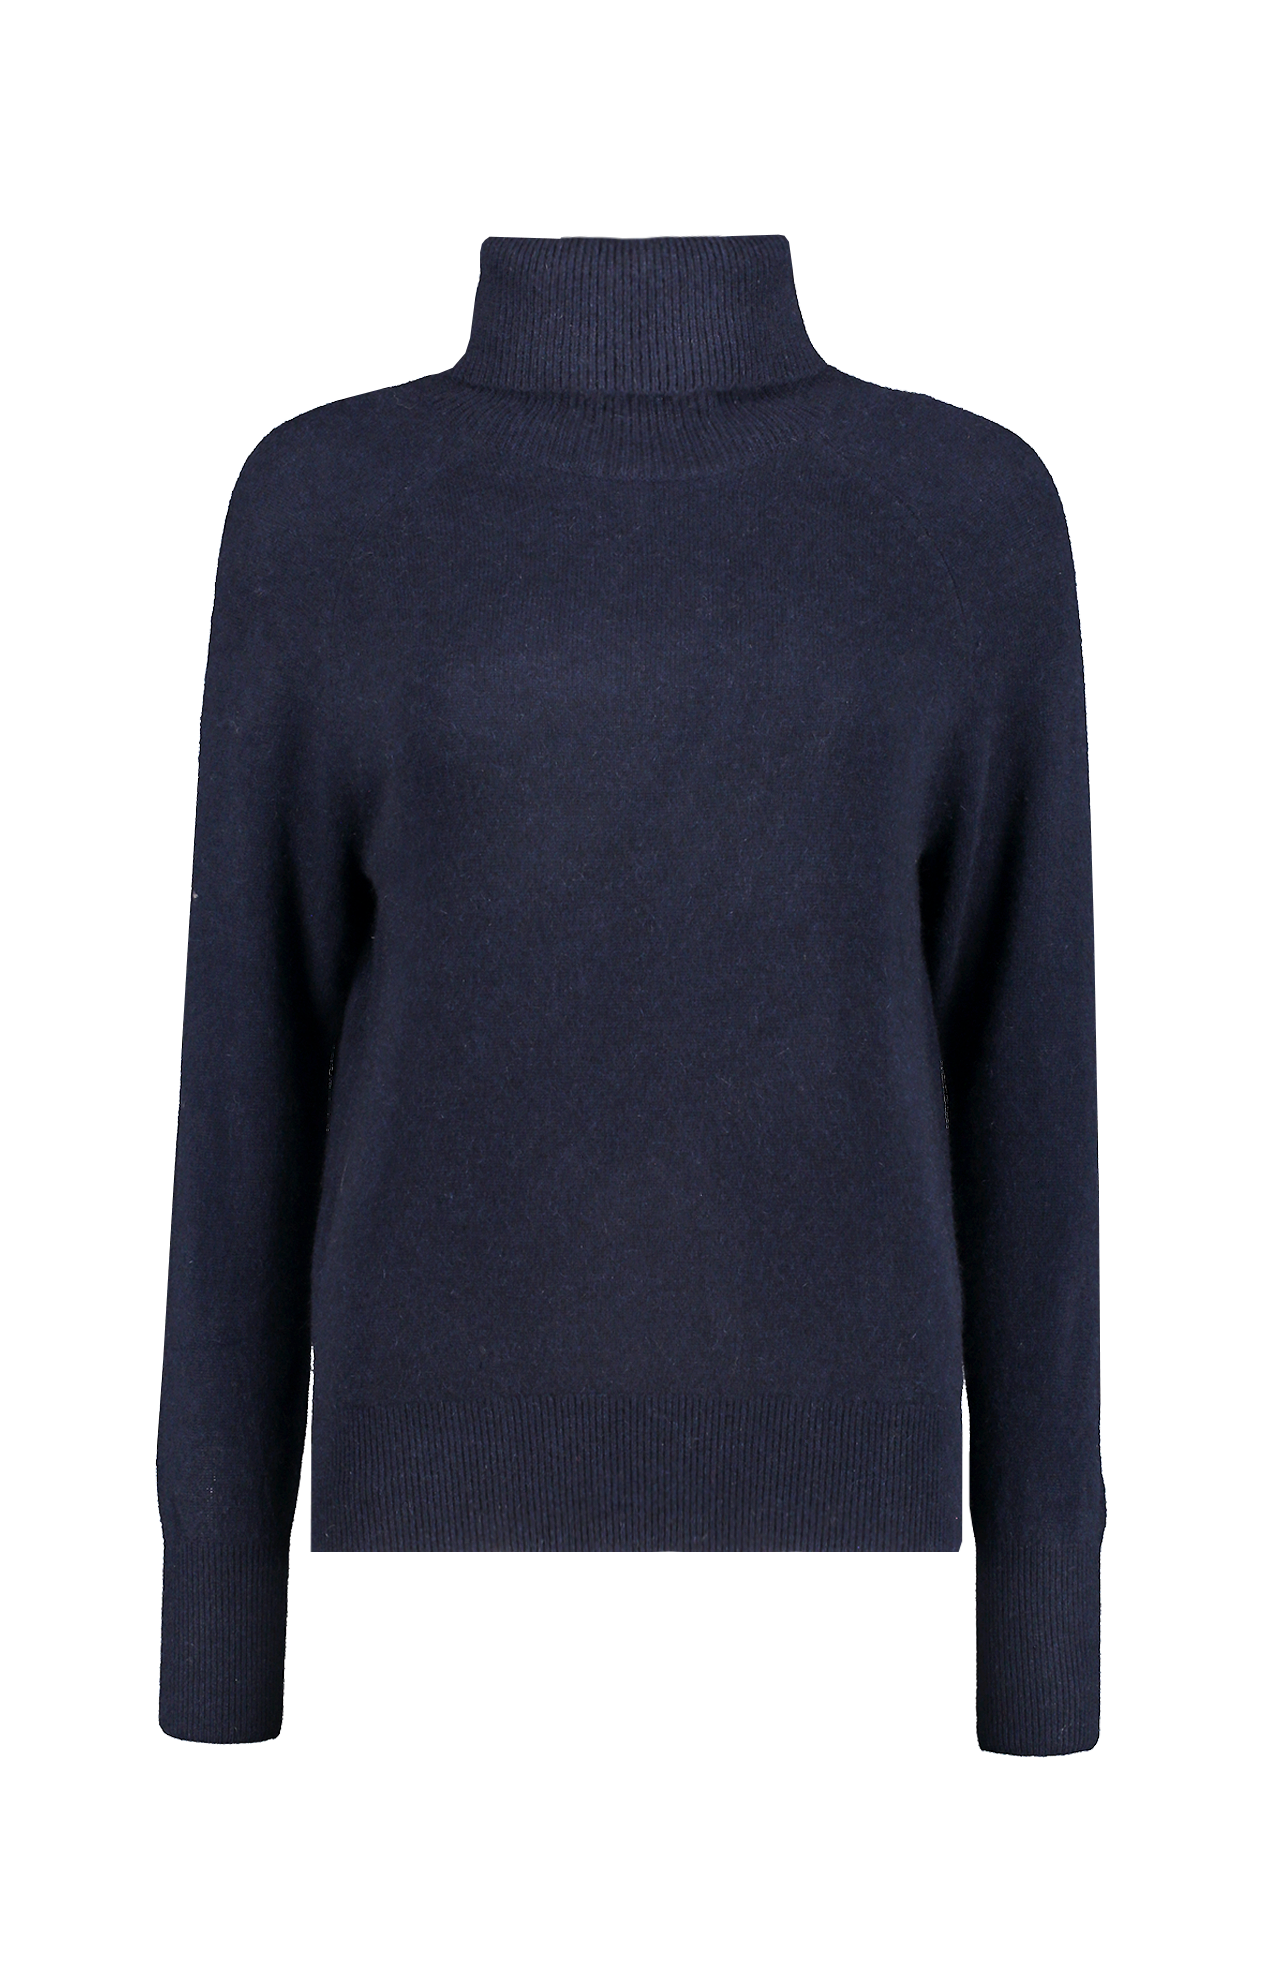 White And Warren Cashmere Essential Turtleneck Sweater Deep Navy Front Mannequin Image (6977567096947)